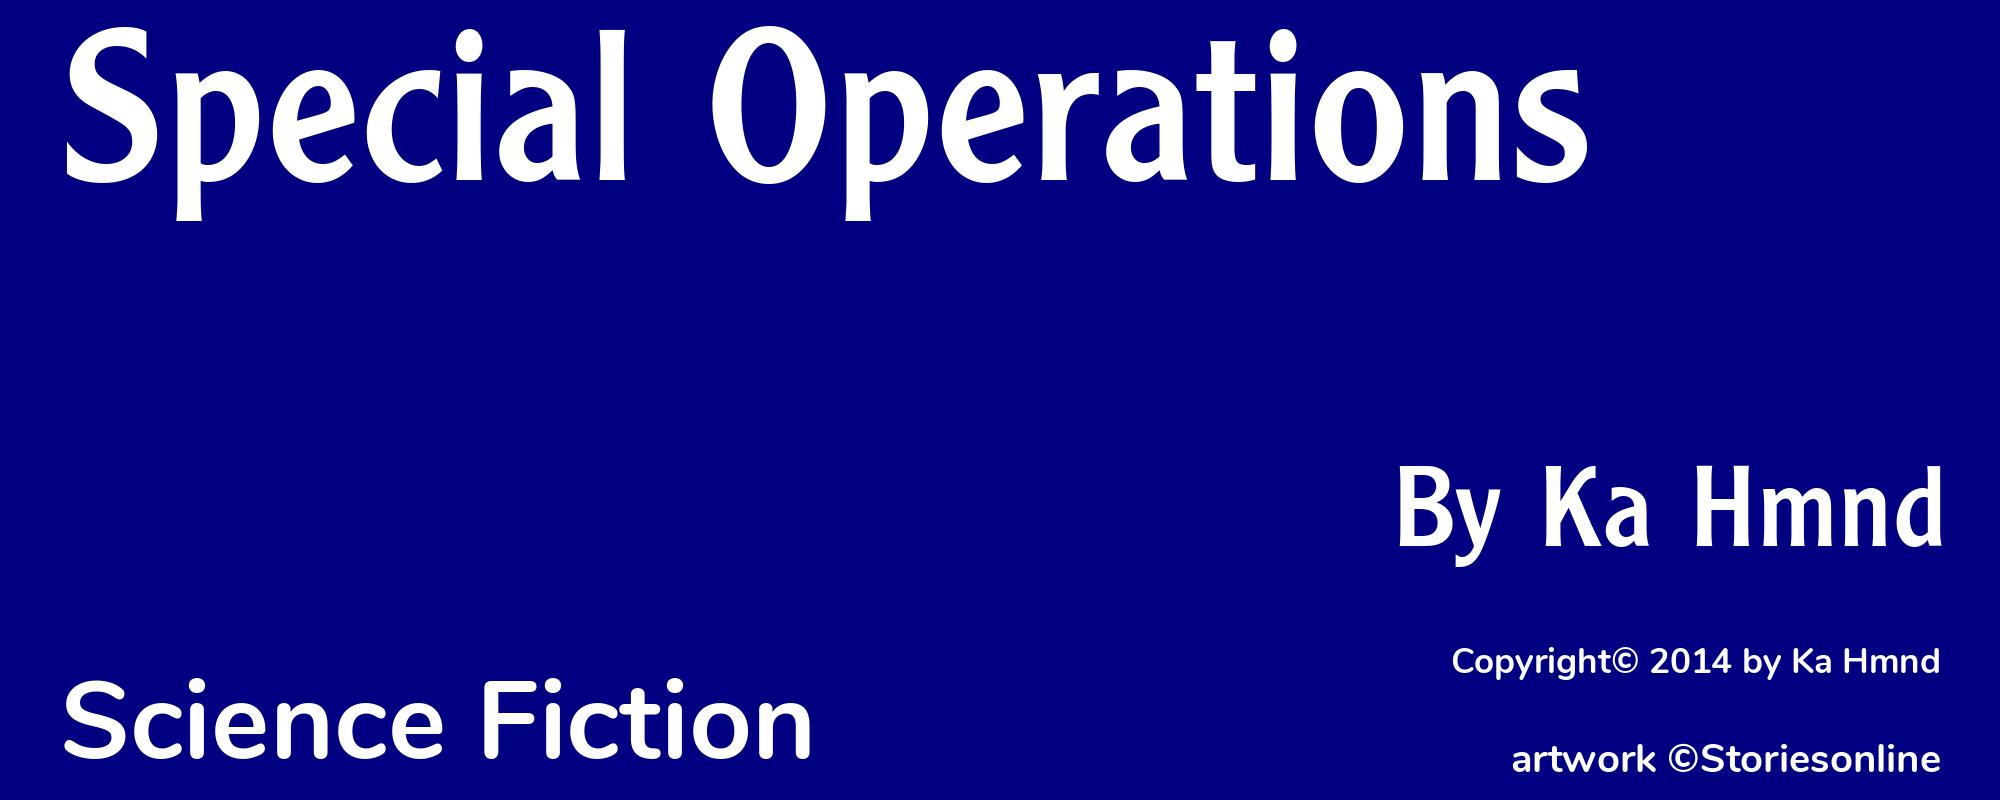 Special Operations - Cover